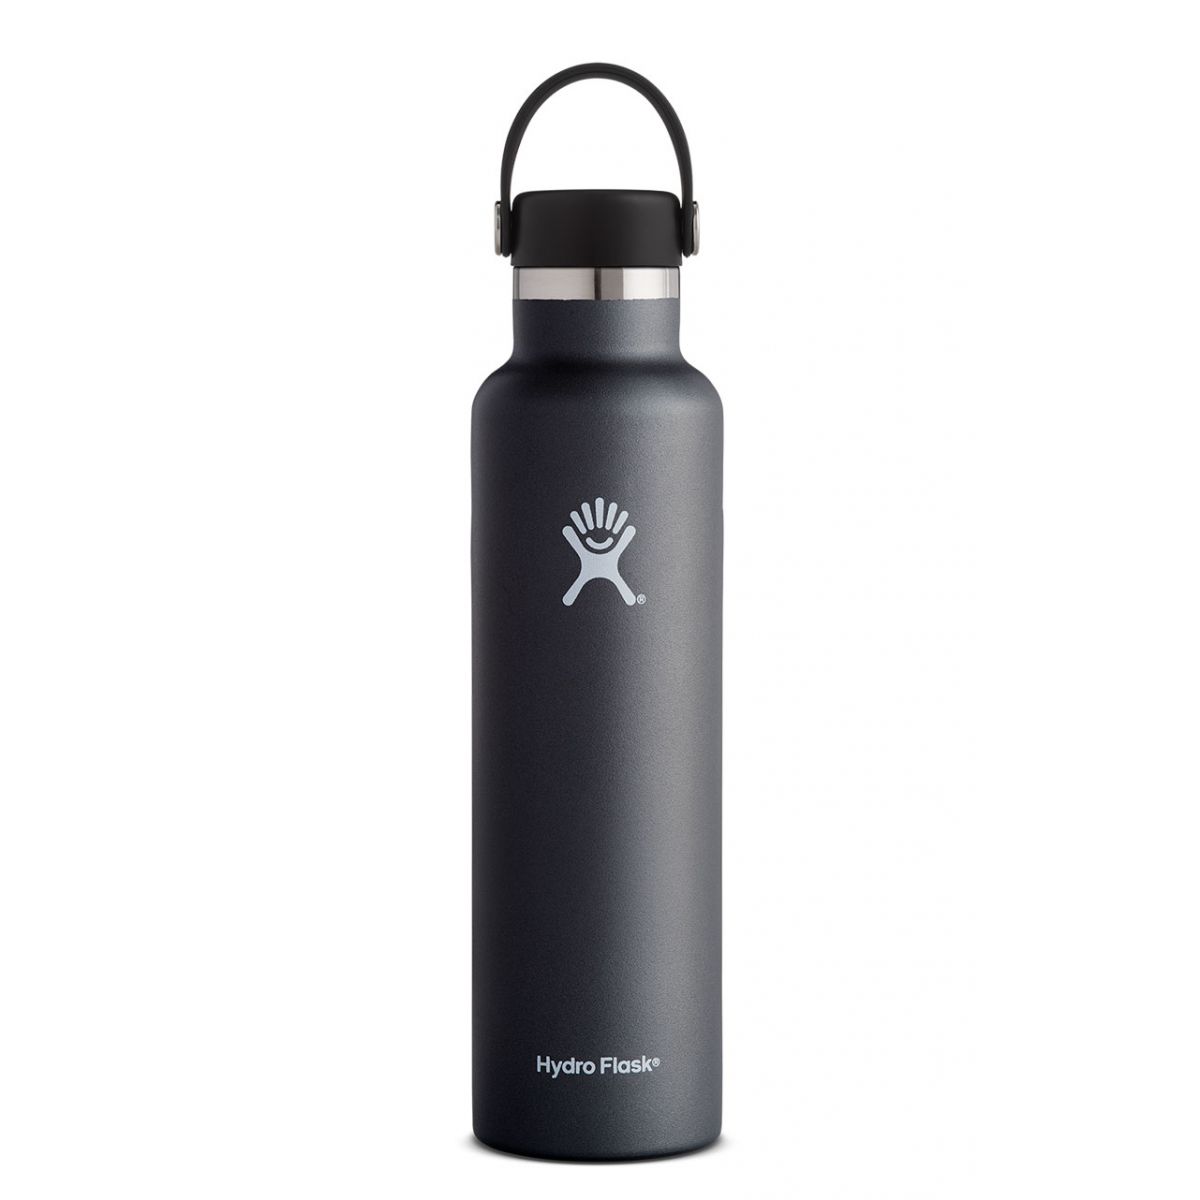 https://cdn.shopify.com/s/files/1/0258/5411/5893/products/hydro-flask-stainless-steel-vacuum-insulated-water-bottle-24-oz-standard-mouth-flex-cap-black.jpg?v=1700406649